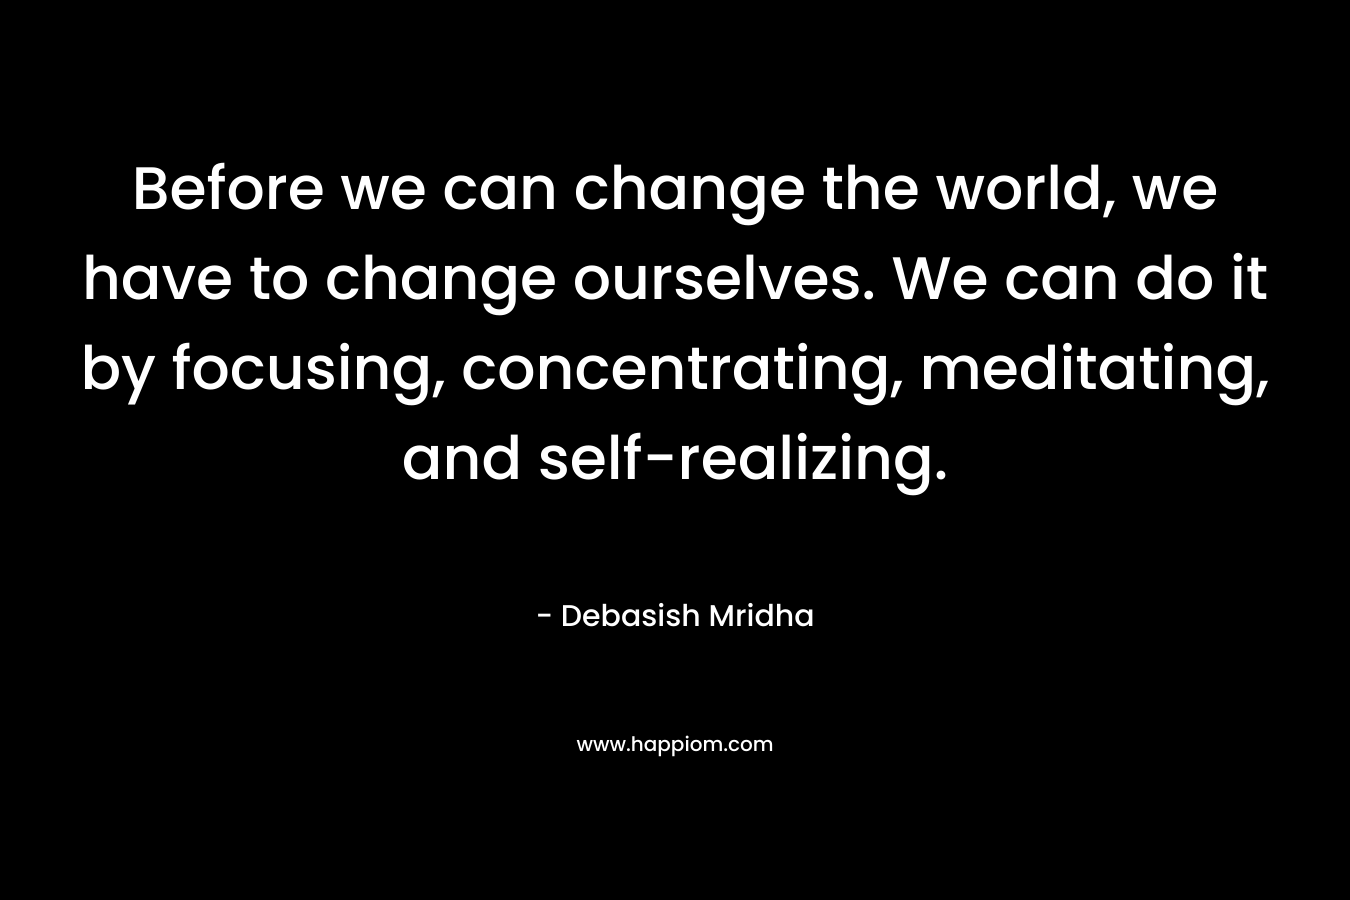 Before we can change the world, we have to change ourselves. We can do it by focusing, concentrating, meditating, and self-realizing. – Debasish Mridha